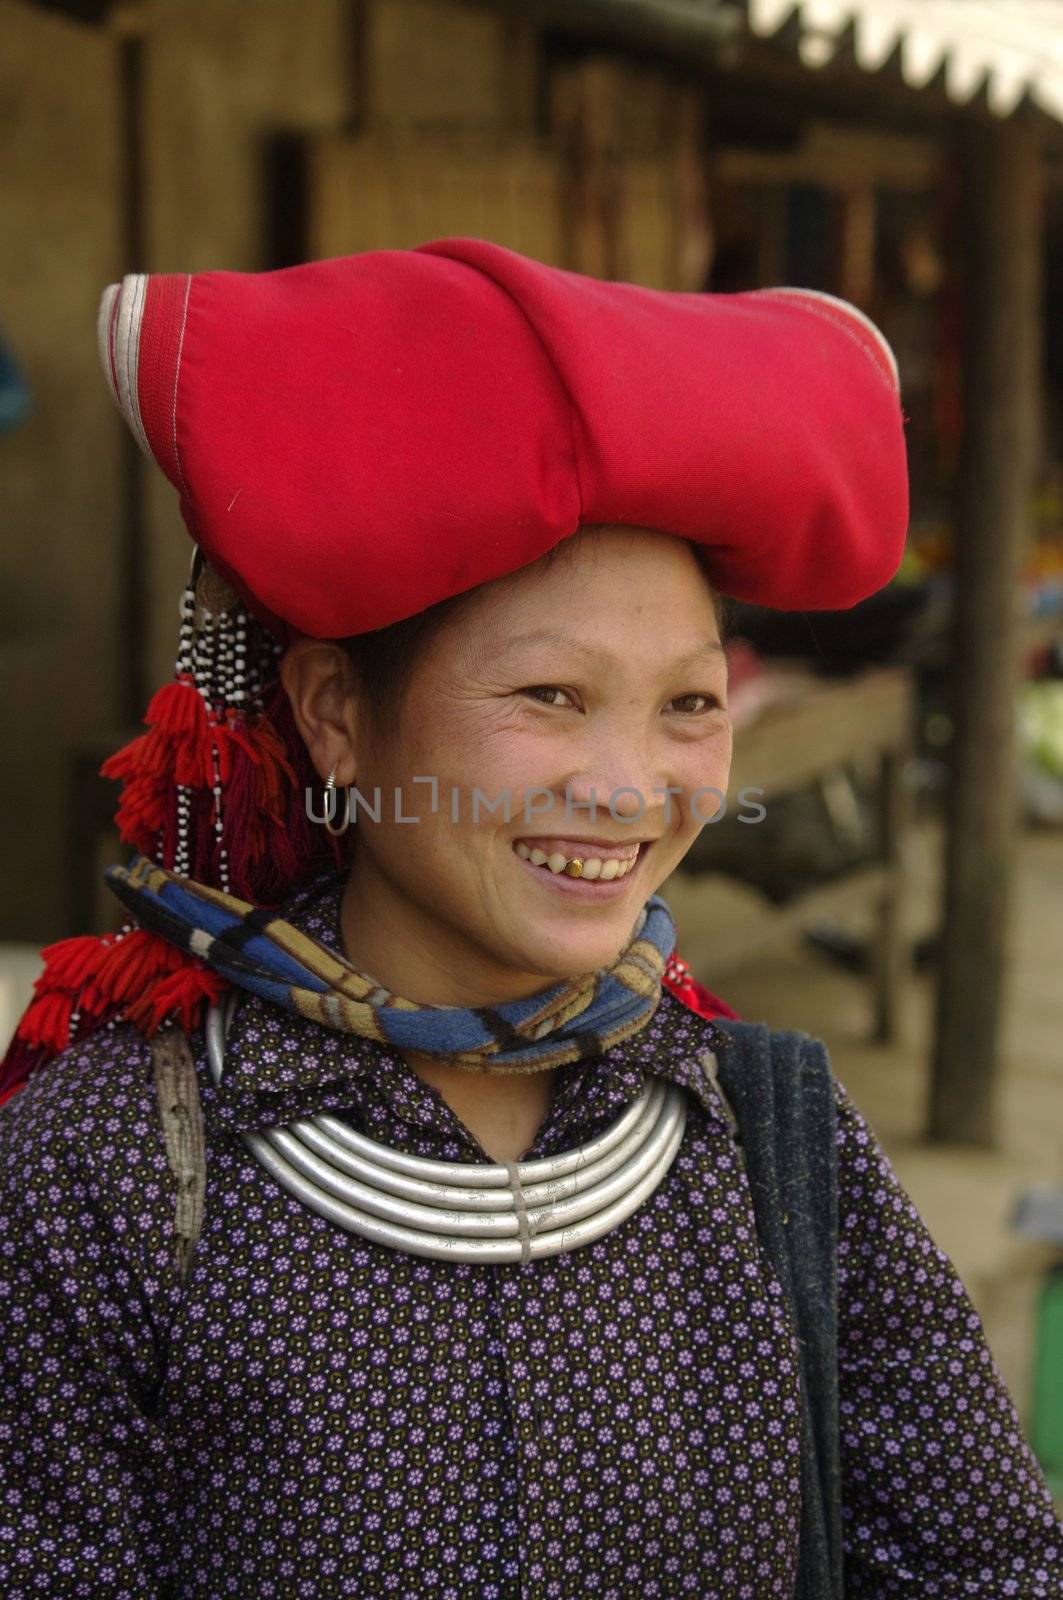 Woman of the ethnic (minority)red Dao pompoms. This beautiful woman is the traditional clothing of his tribe and the headdress of married women. A basket in the back he used to transport vegetables to the house and contains the essential umbrella, which also serves to protect against the sun. The standard of beauty for women in Asia is to have white skin